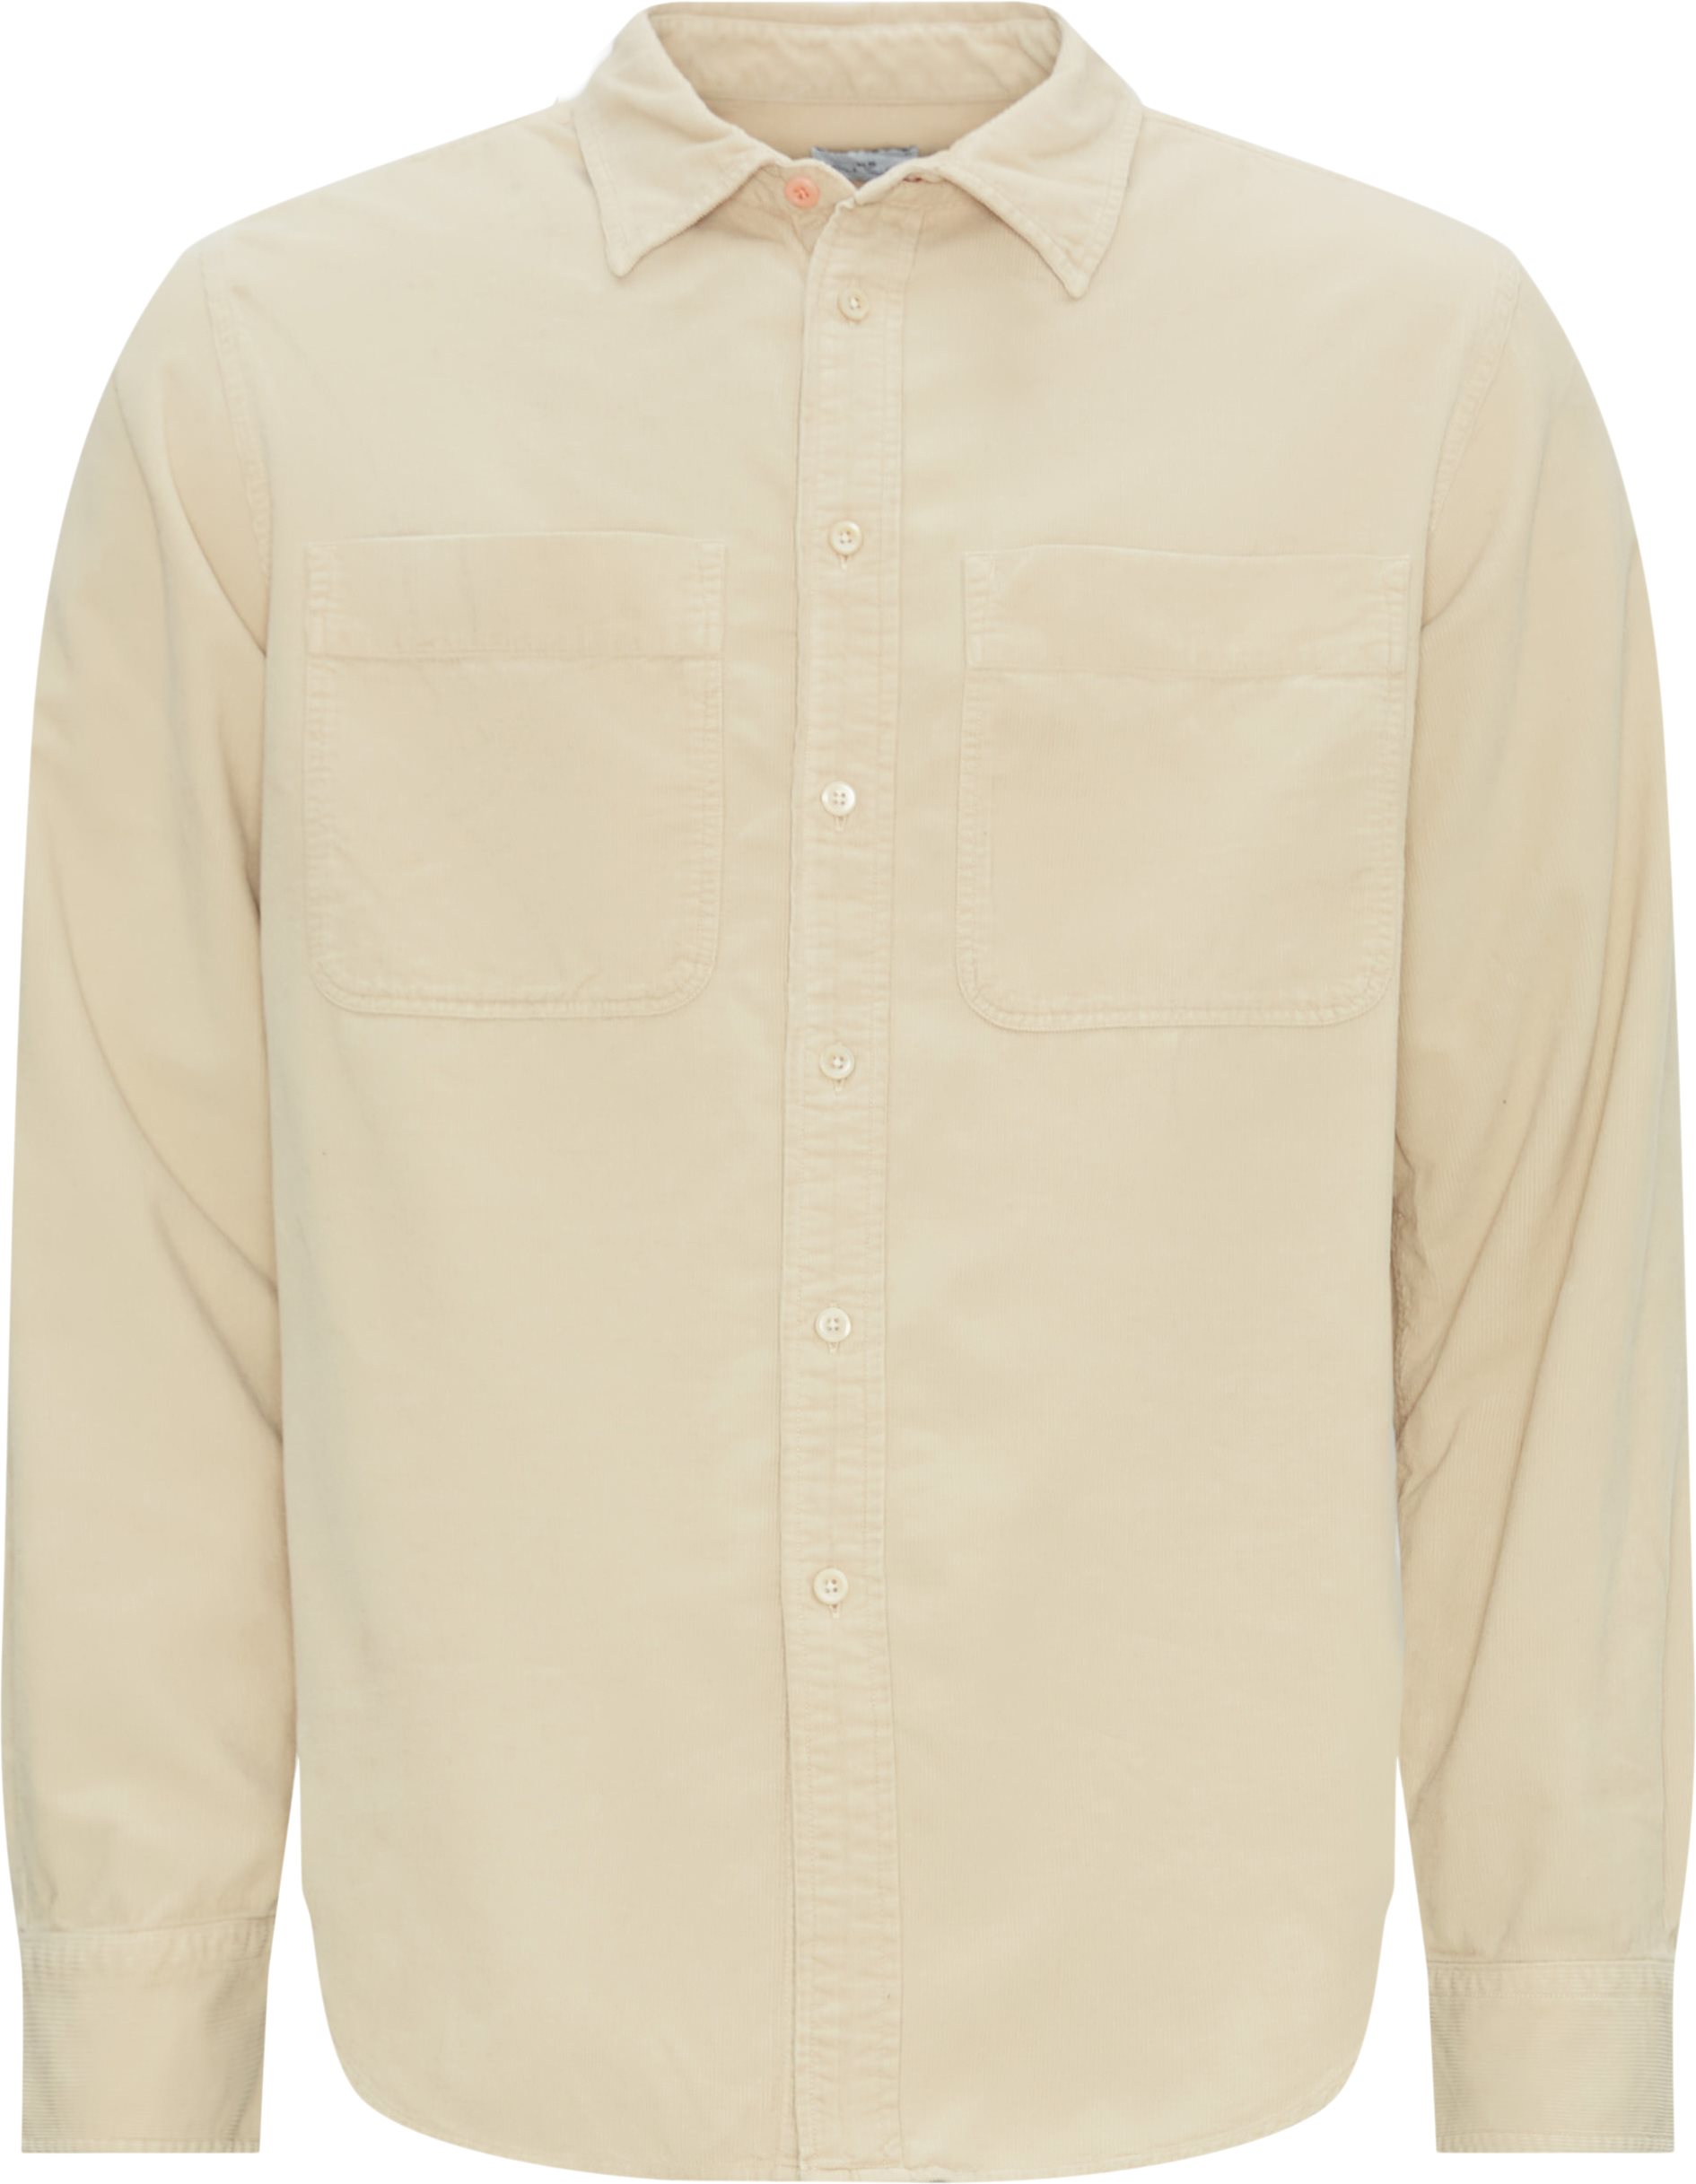 PS Paul Smith Shirts 450Y L21879 Sand